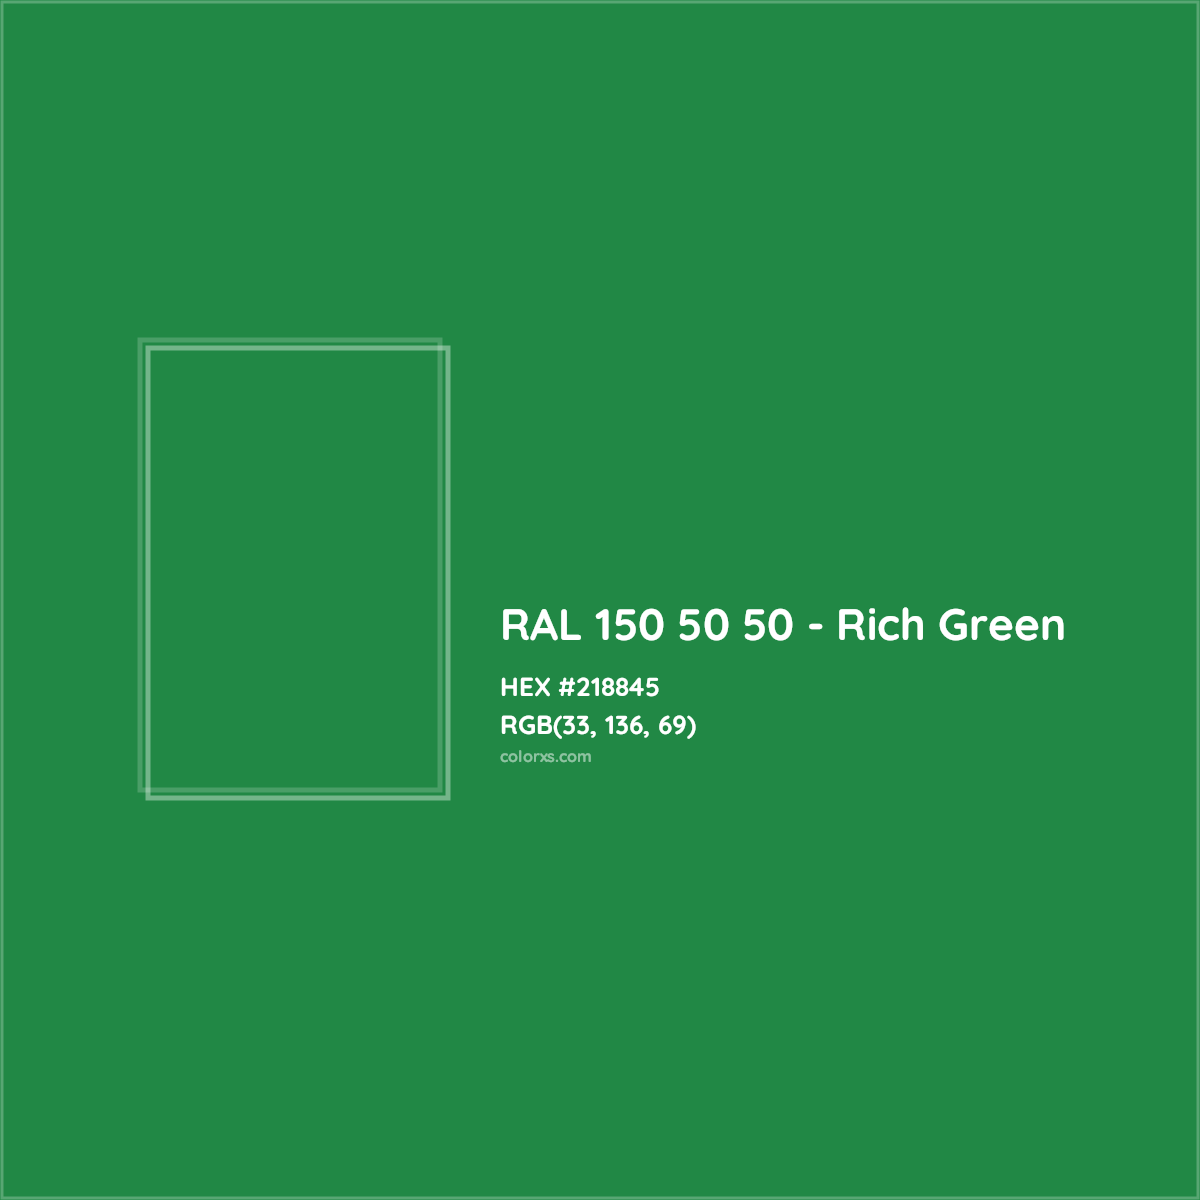 HEX #218845 RAL 150 50 50 - Rich Green CMS RAL Design - Color Code